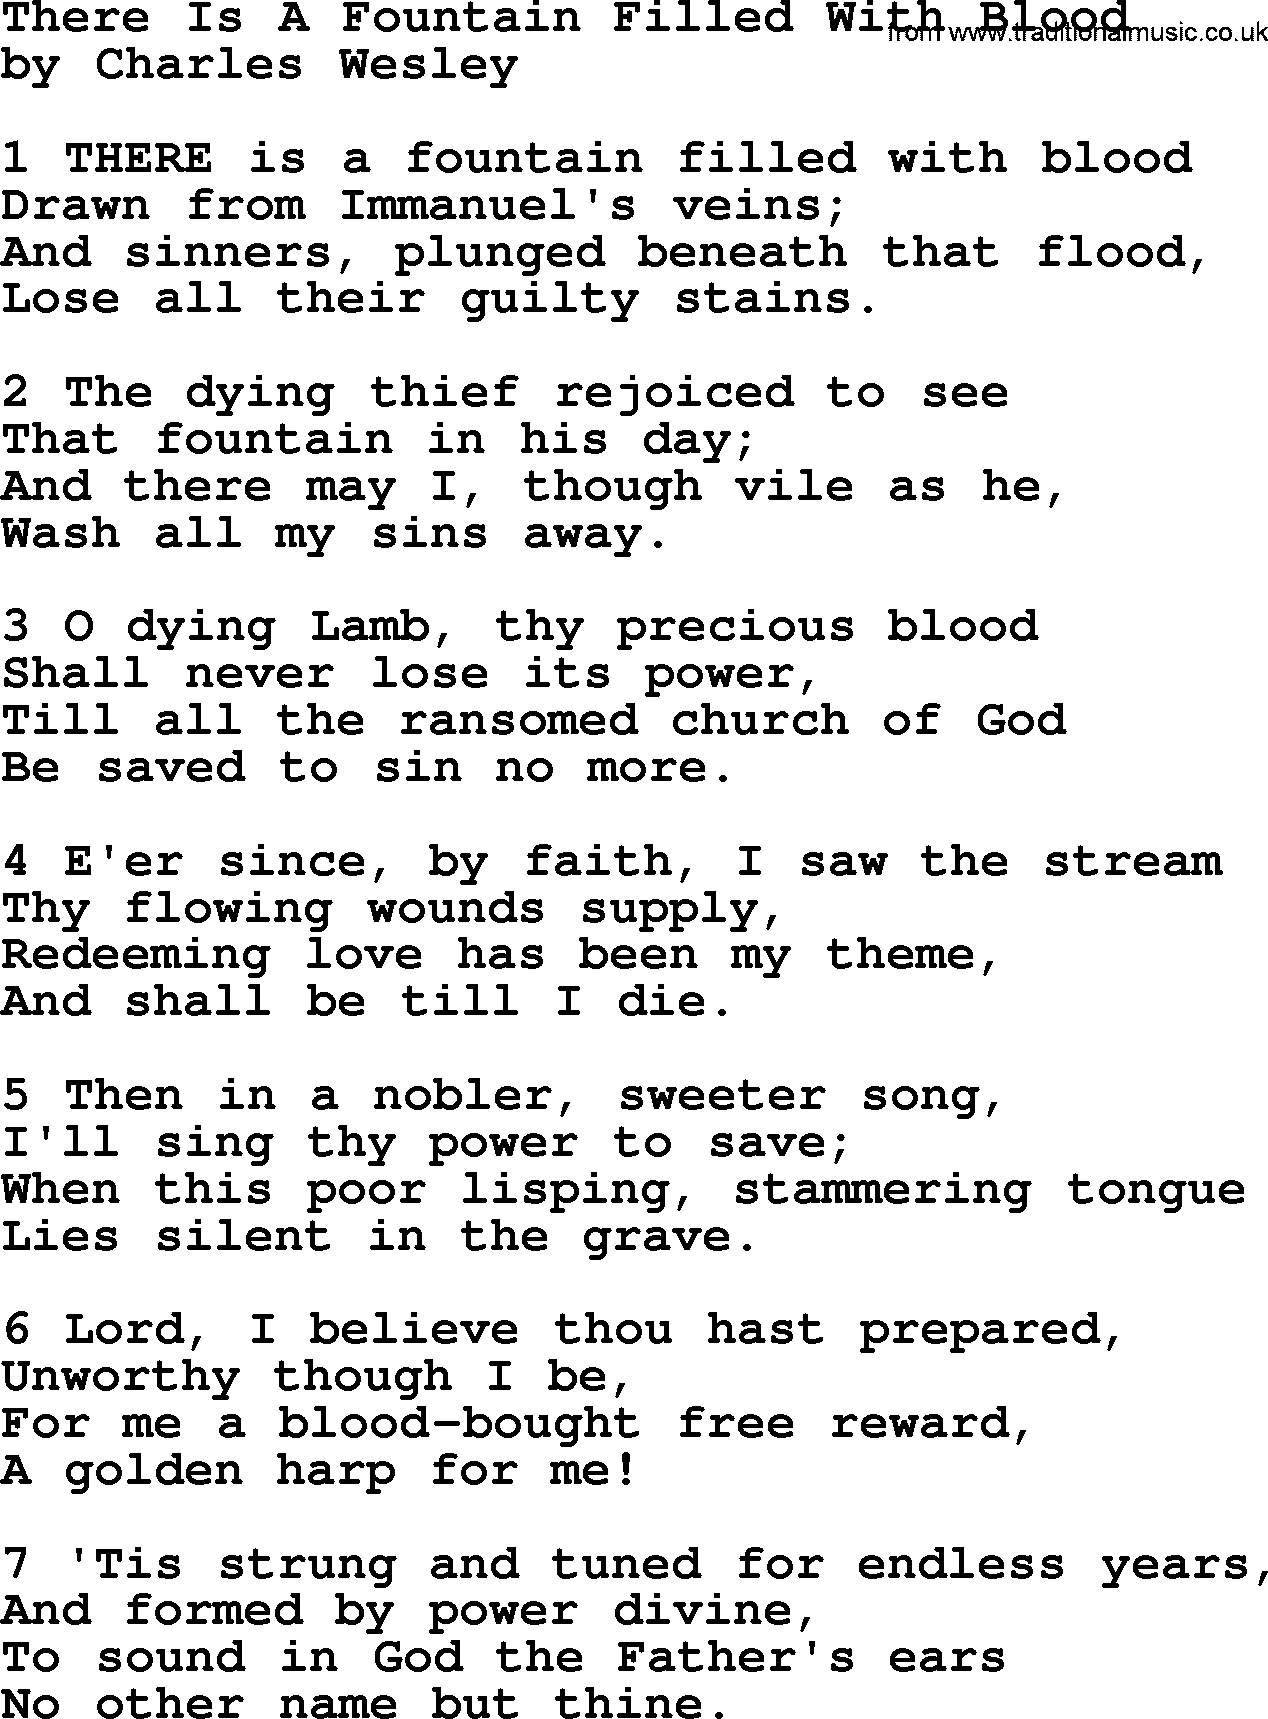 Charles Wesley hymn: There Is A Fountain Filled With Blood, lyrics